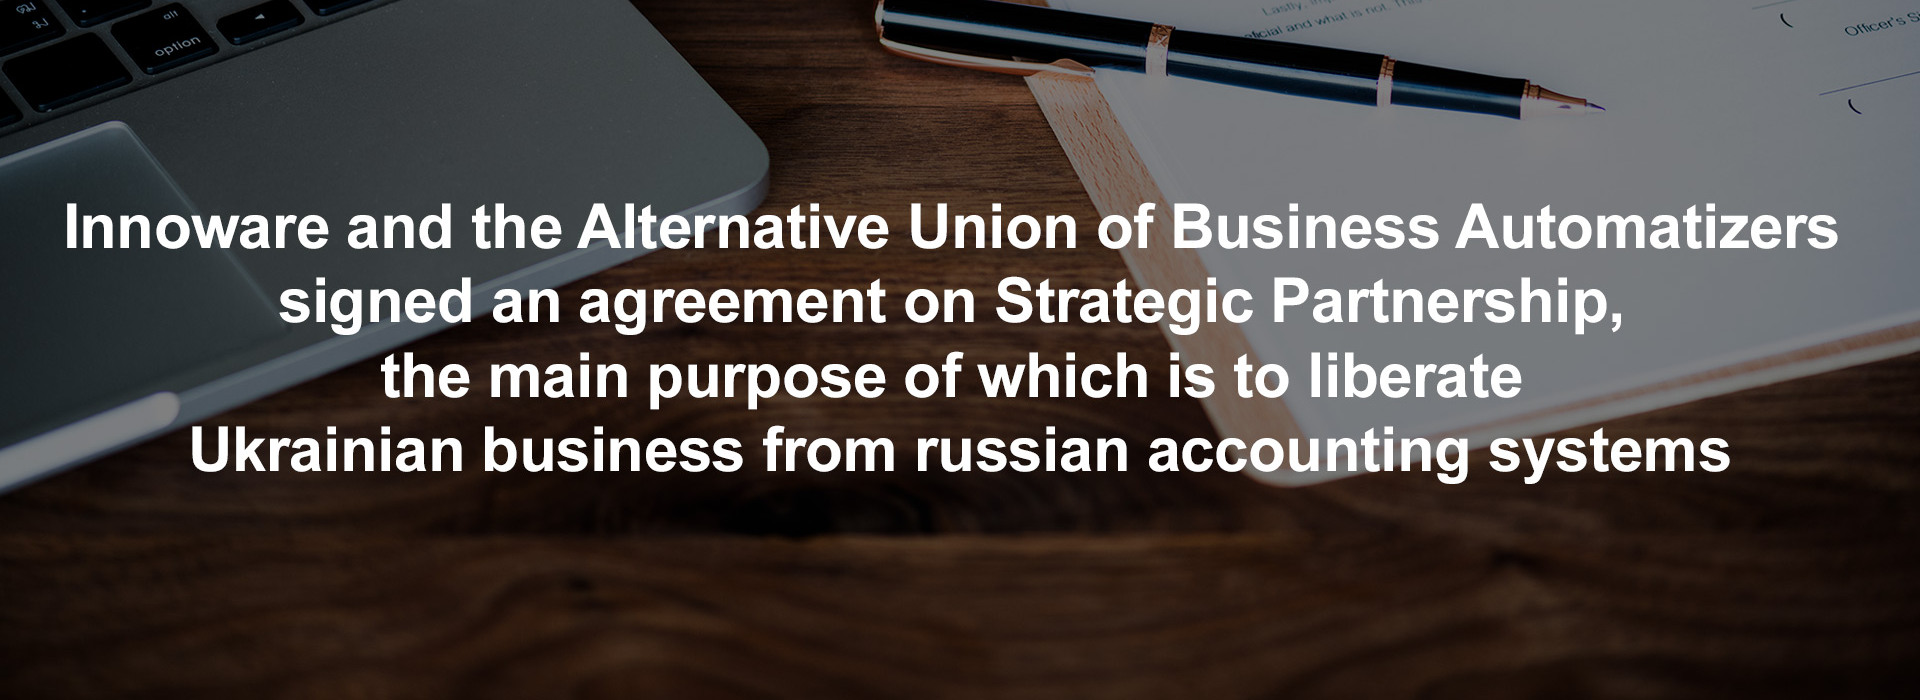 Innoware and the Alternative Union of Business Automatizers Signed an Agreement on Strategic Partnership, the Main Purpose of Which Is to Liberate Ukrainian Business from russian Accounting Systems